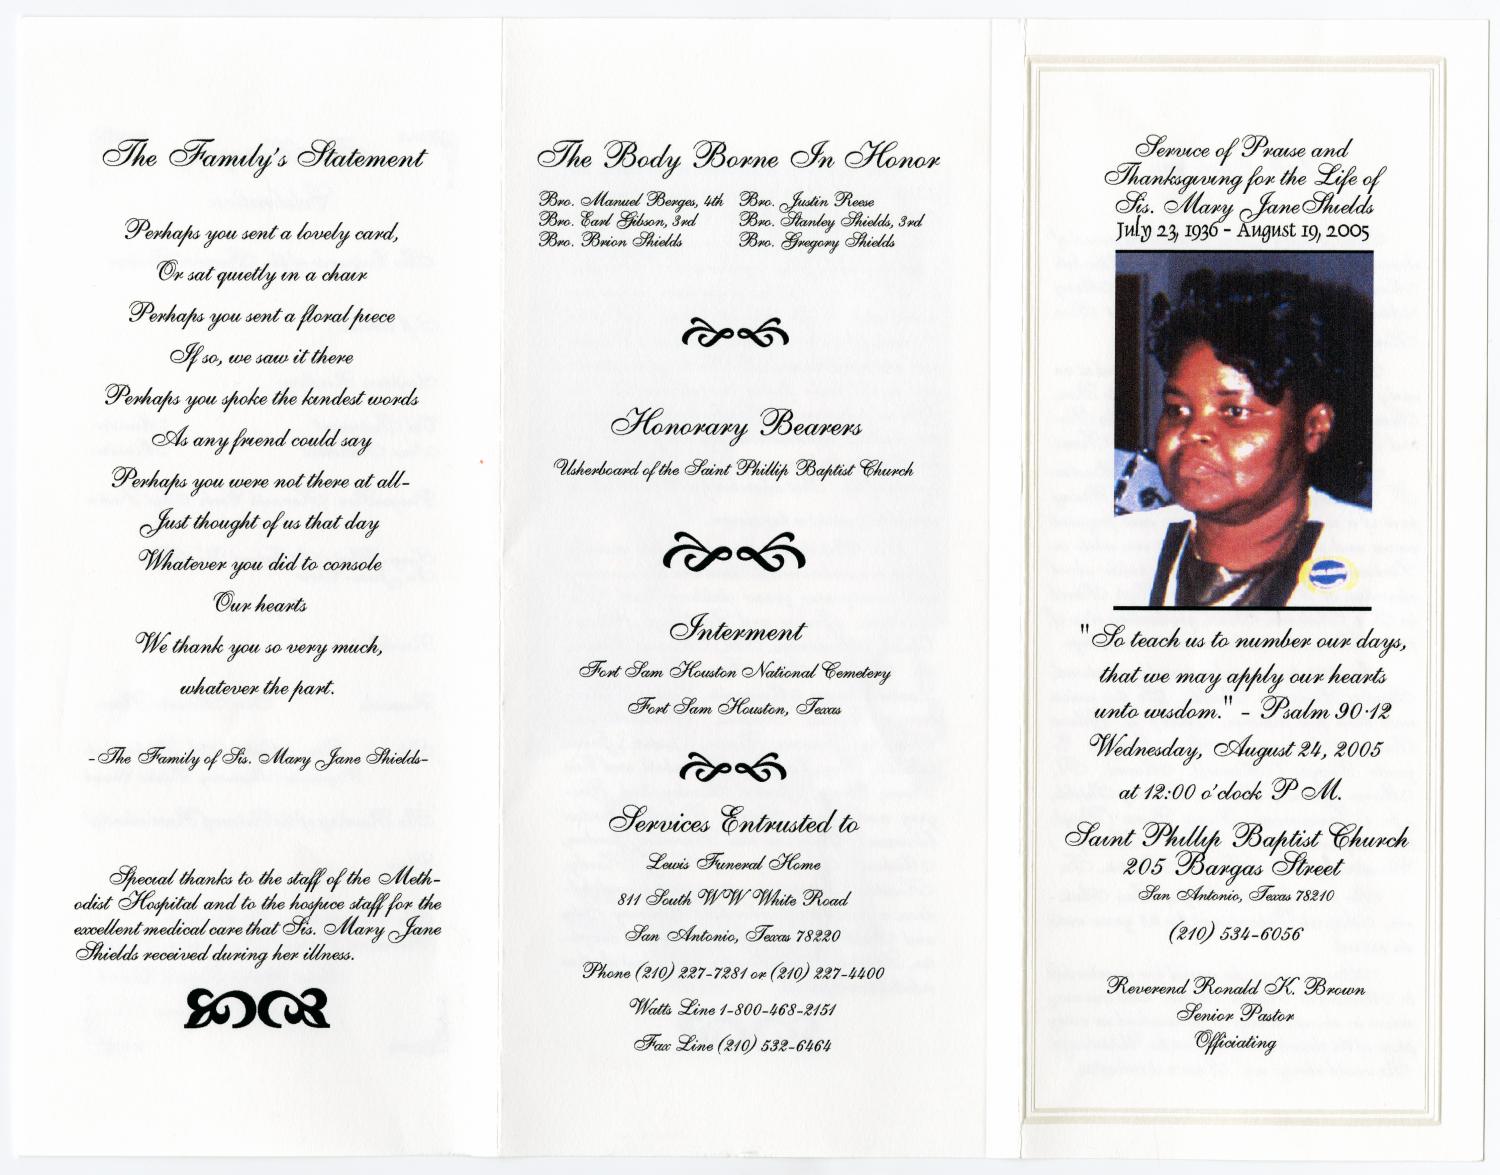 [Funeral Program for Mary Jane Shields, August 24, 2005]
                                                
                                                    [Sequence #]: 3 of 3
                                                